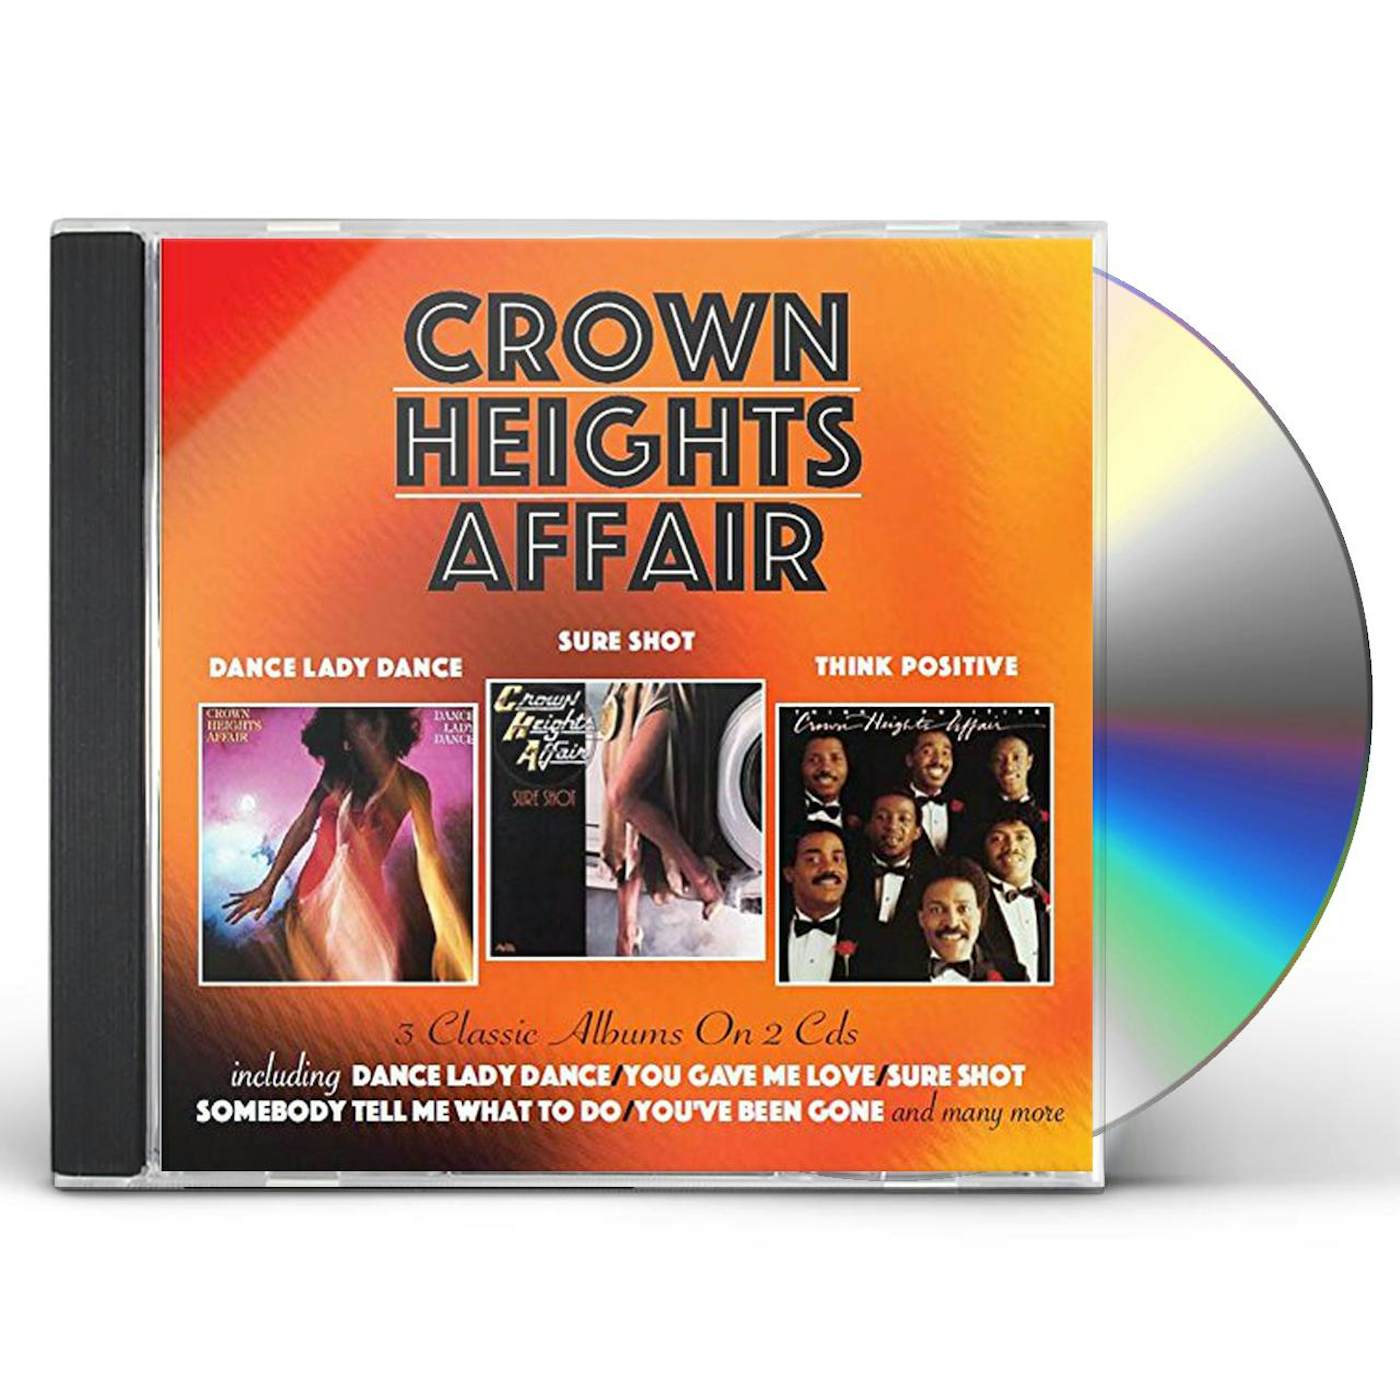 Crown Heights Affair DANCE LADY DANCE / SURE SHOT / THINK POSITIVE CD